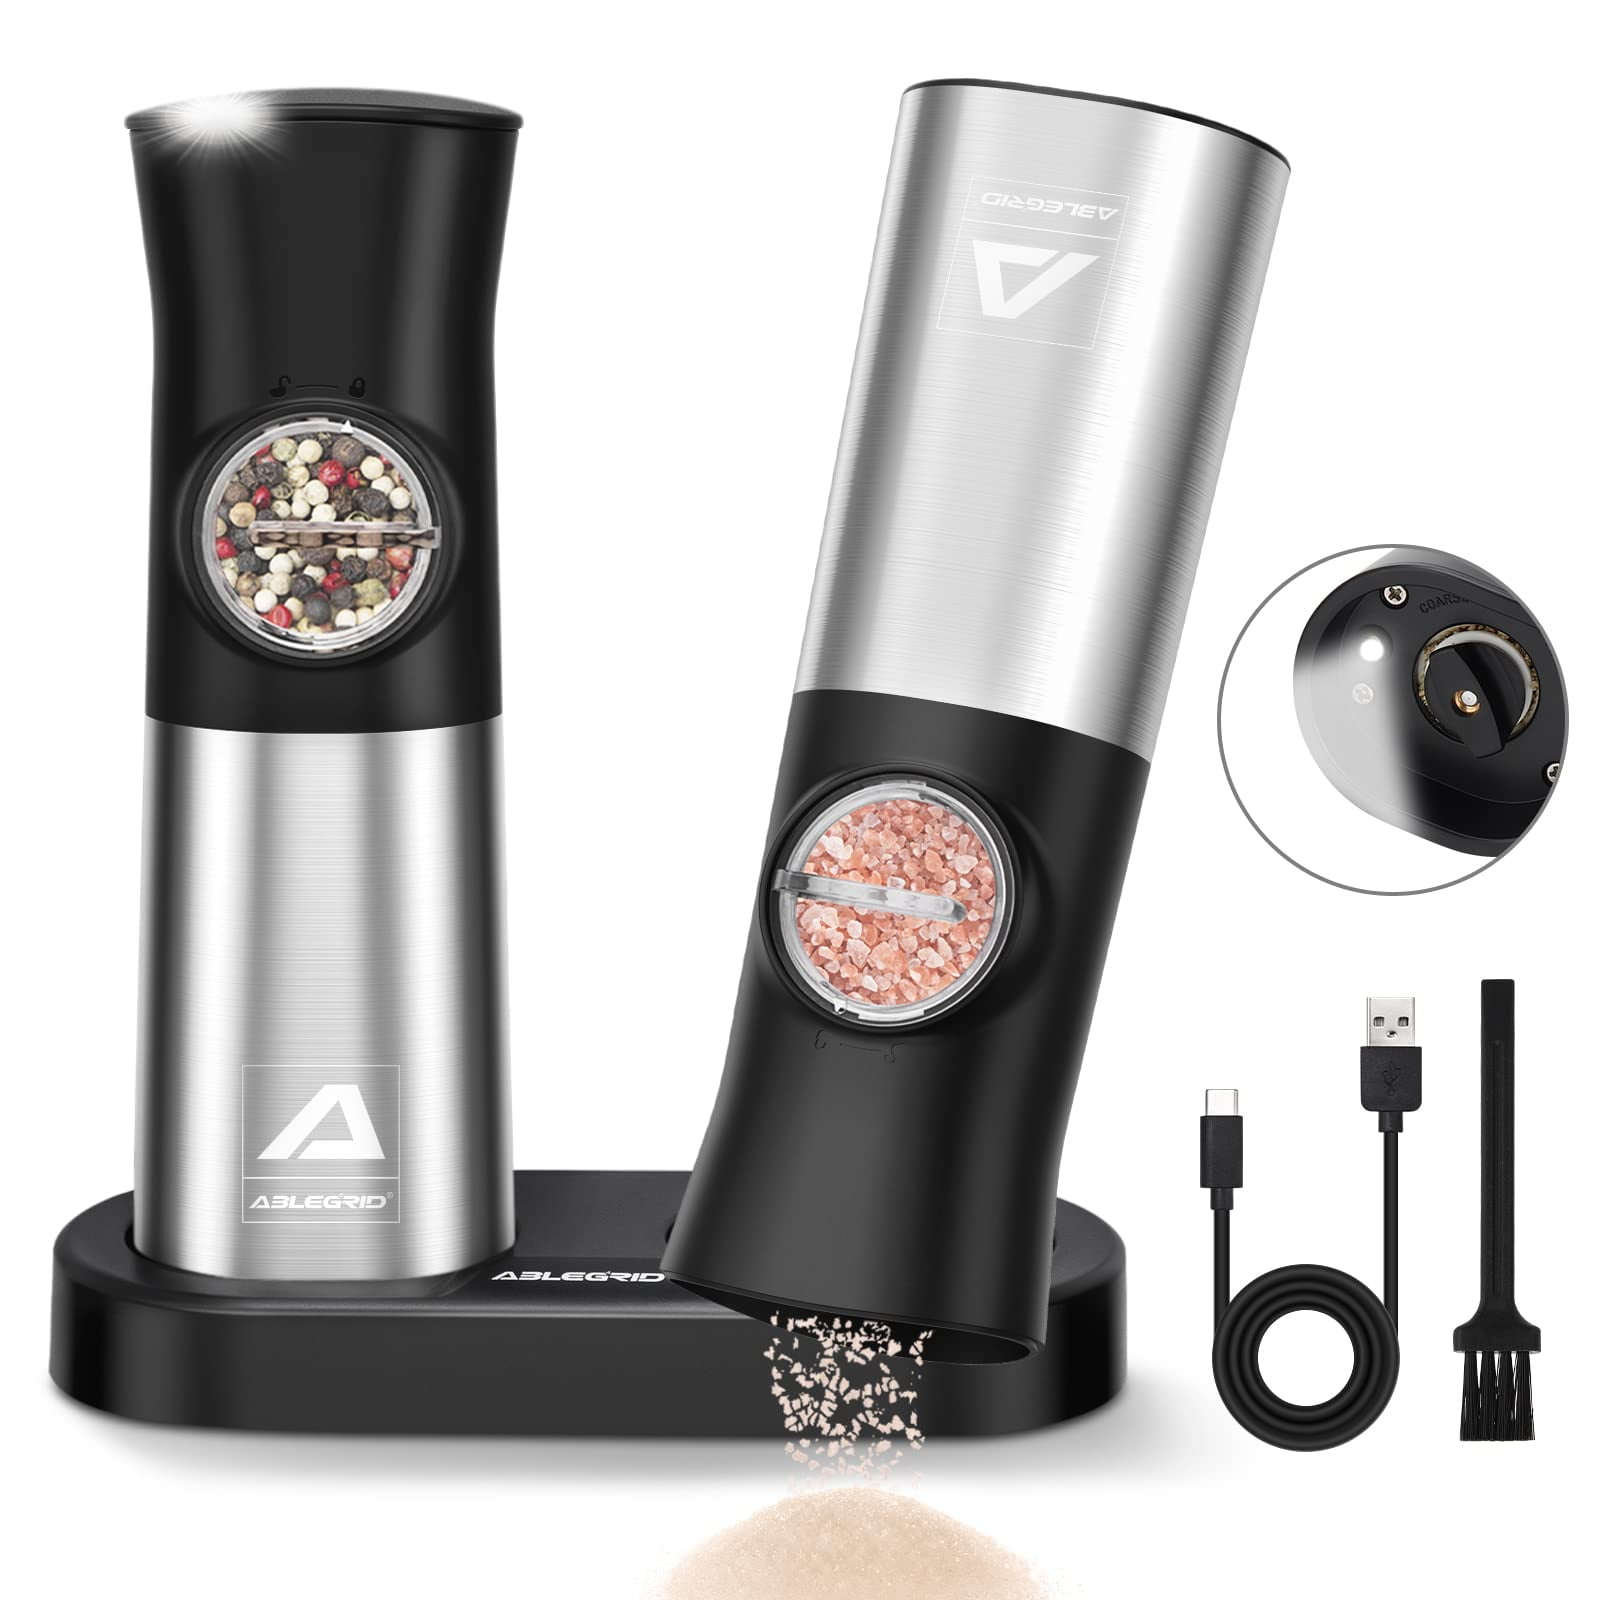 Tripumer Gravity Electric Pepper and Salt Grinder Set, Adjustable  Coarseness, Battery Powered with LED Light, One Hand Automatic Operation  2PACK (Black) 